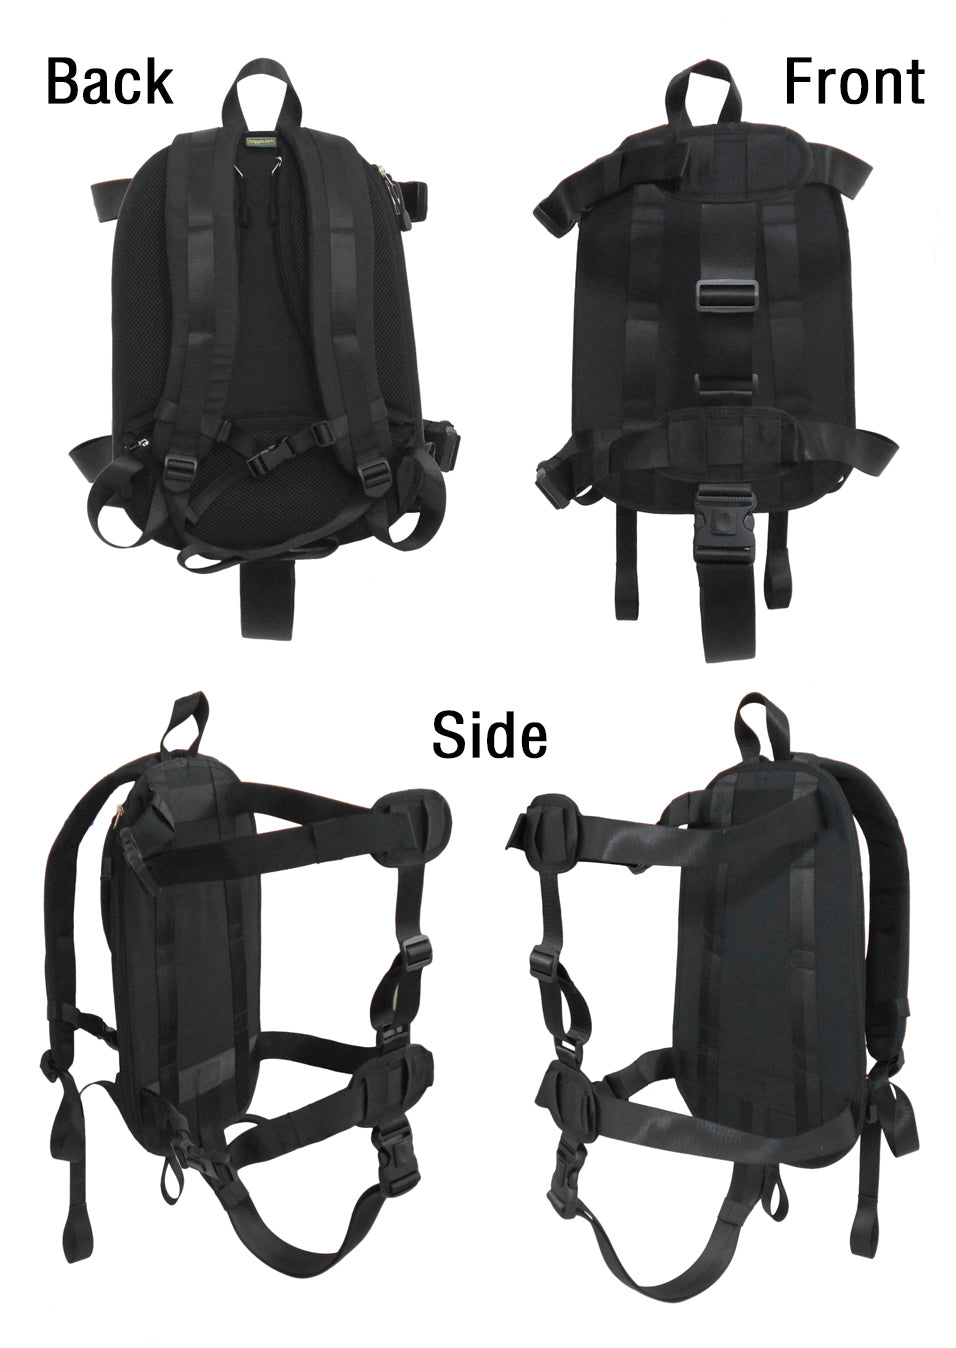 Backpack Carrying System with Adjustable Strap – Ideal for Carrying Small to Medium Size Hard Shell Case/Hand Baggage.